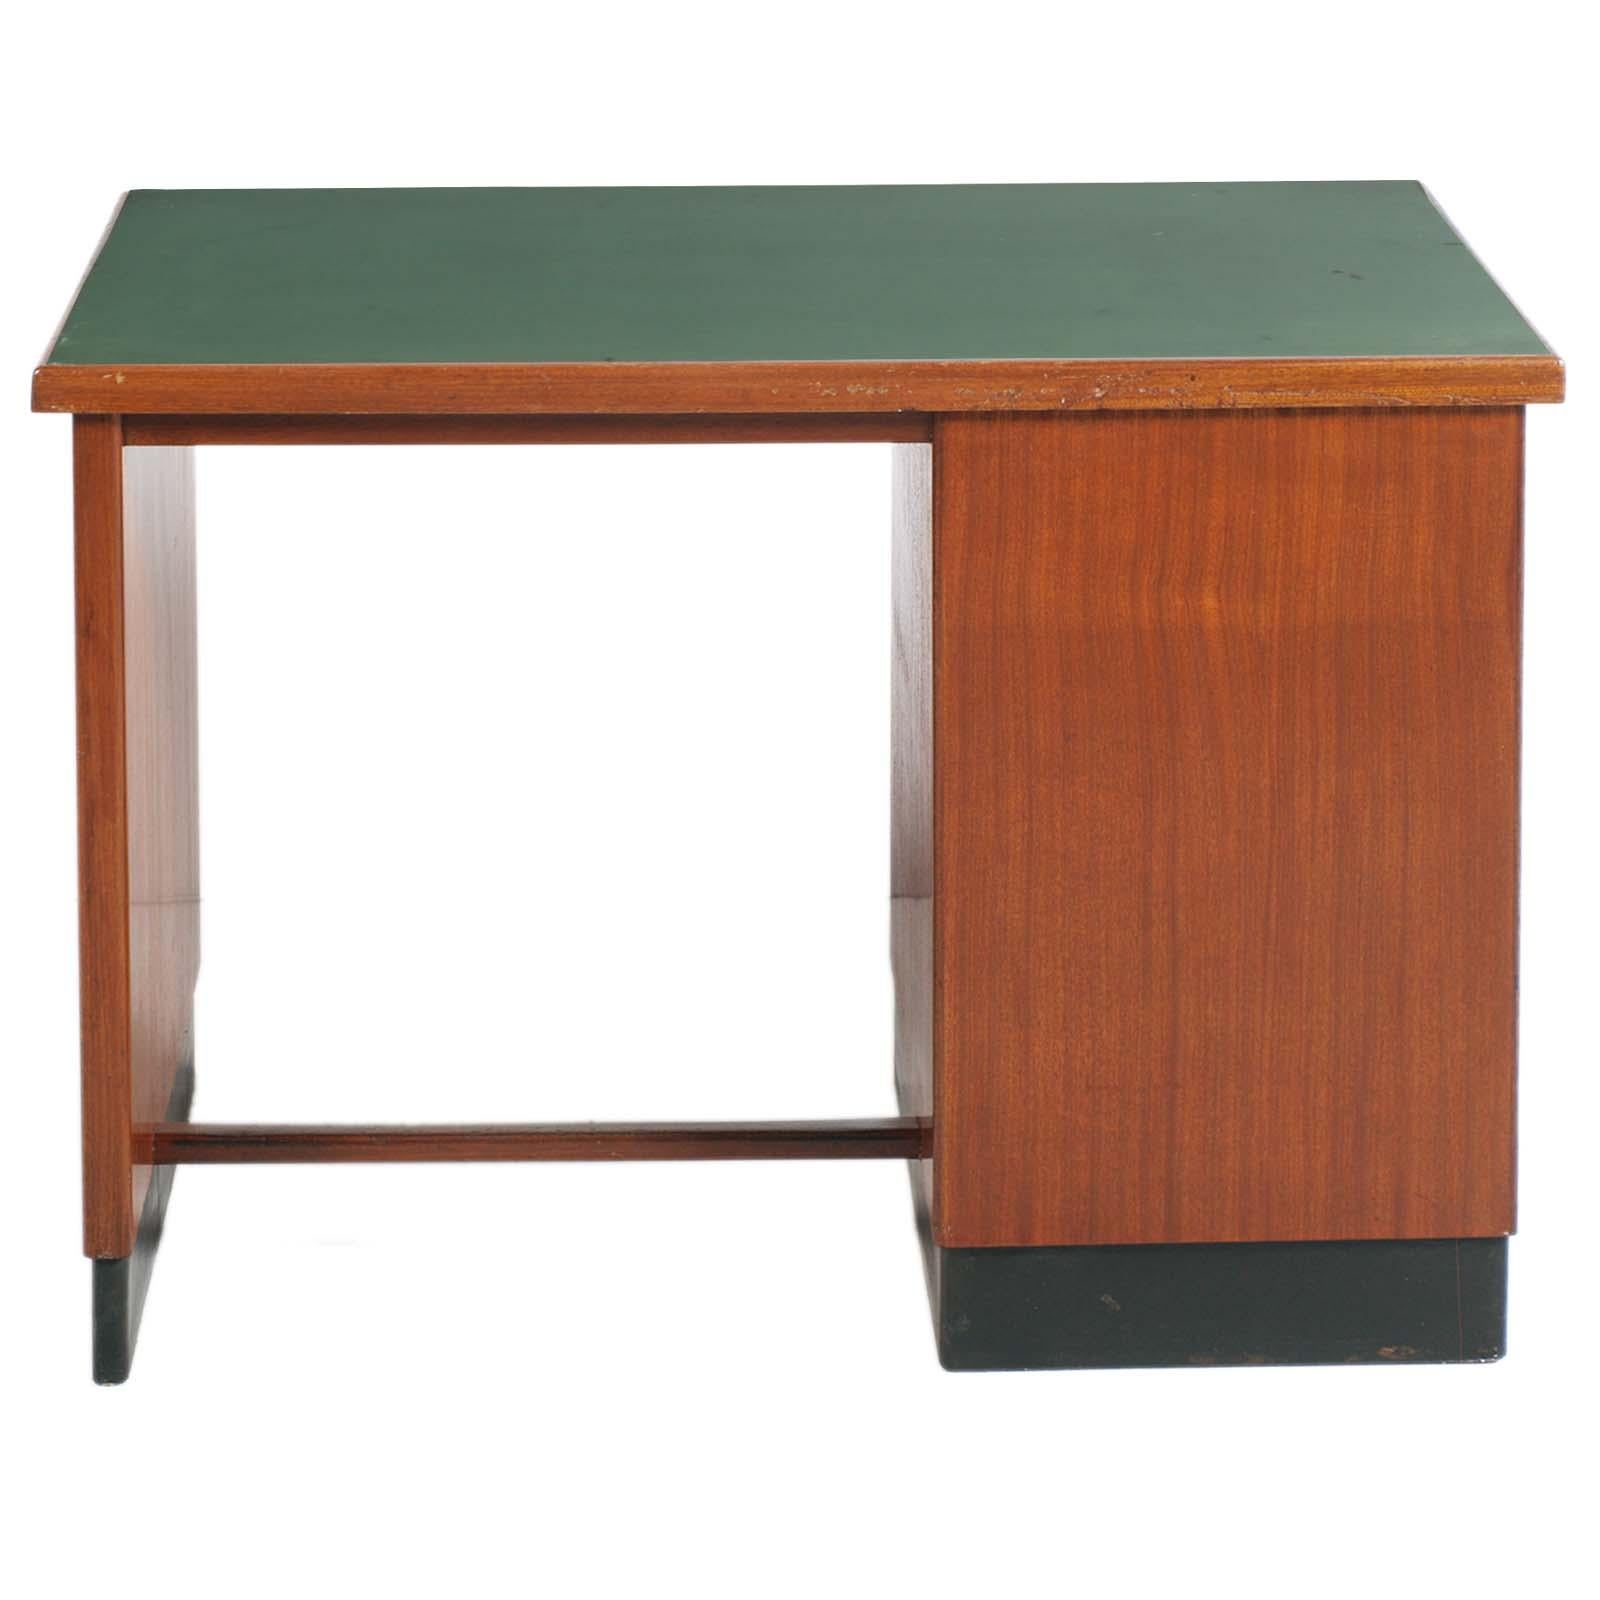 1930s, Italian Art Deco Desk Writing Table Four Drawers in Blond Walnut For Sale 1